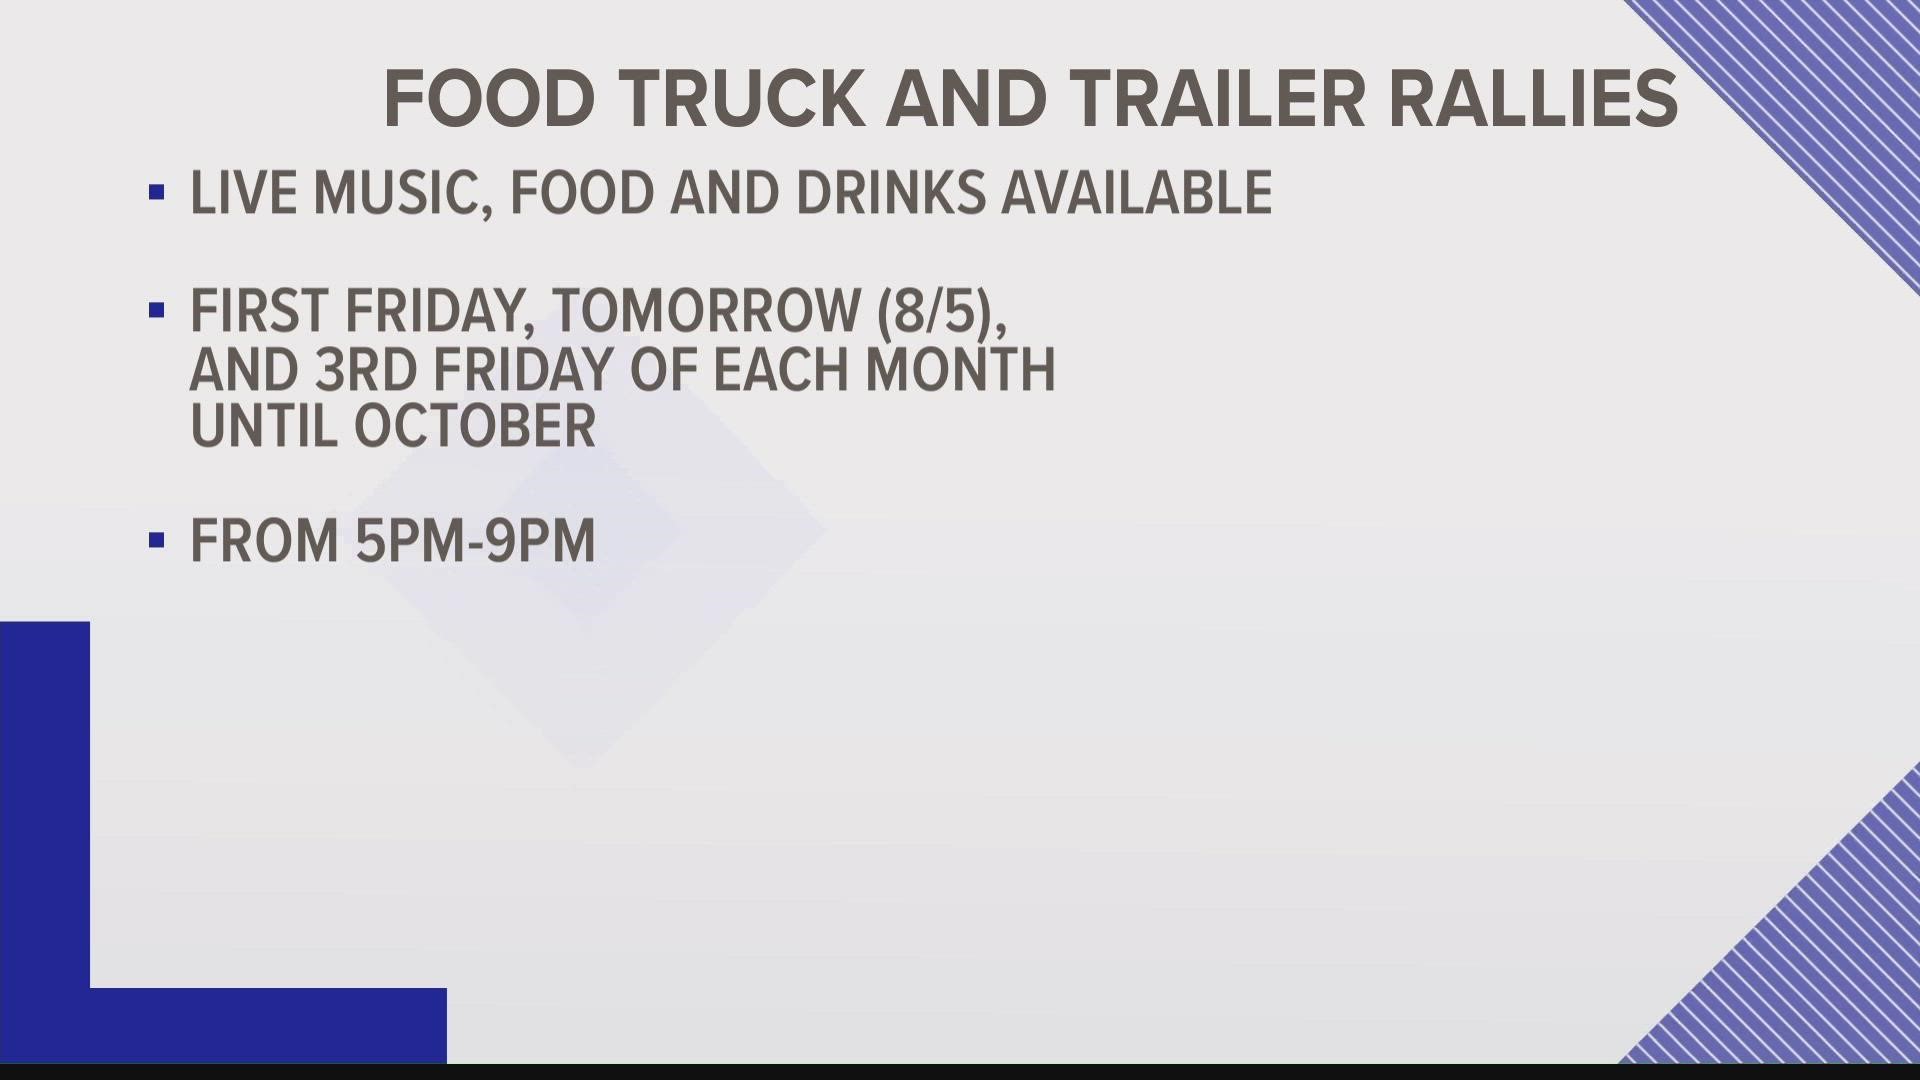 You can kick off your weekend with the food trailer rally in big spring park for live music, delicious food and drinks!